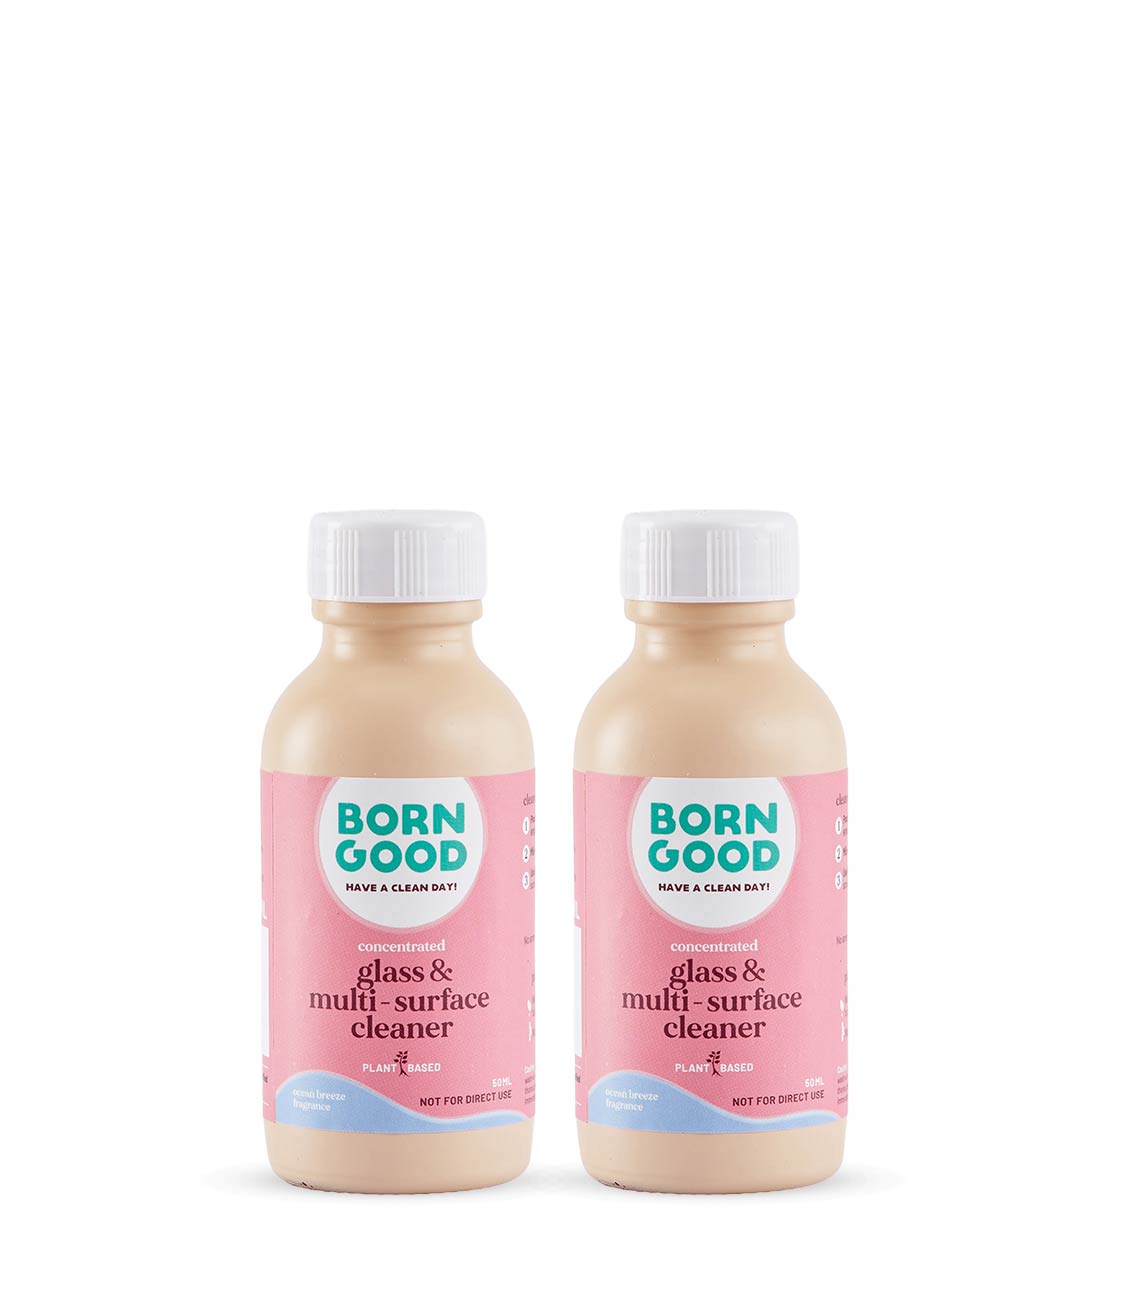 Born Good Plant-based Glass & Multi-Surface Cleaner Concentrate 50ml x 2 (Makes 1 L)